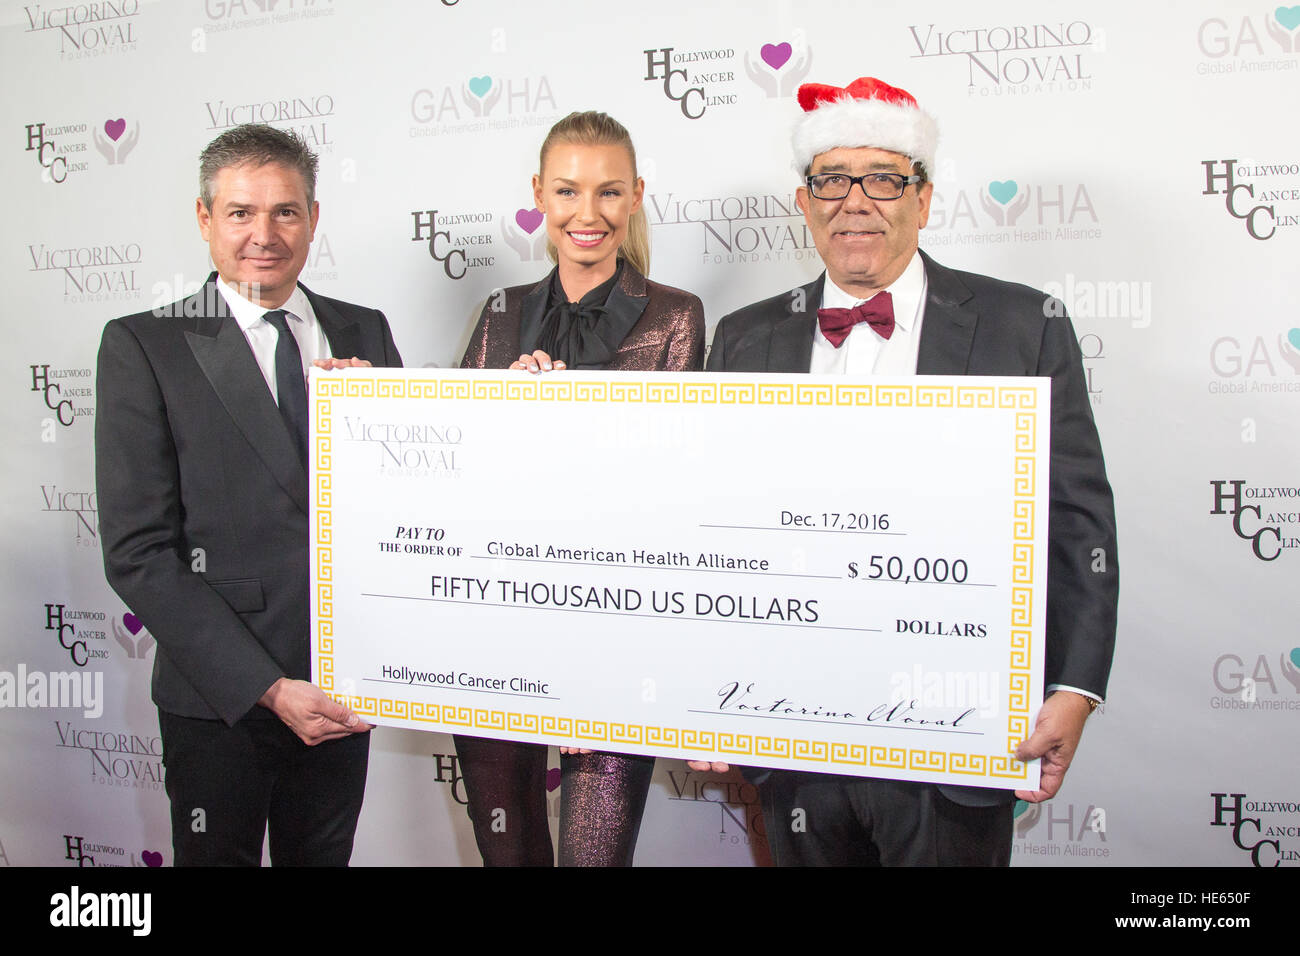 Beverly Hills, California, USA. 17th December, 2016. Dr. Alexander Gershman, Hannah Noval, and Victorino Noval hold a check representing the $50,000 donation check from Victorino Noval at the Victorino Noval Foundation Christmas Party Benefiting the Global American Health Alliance at the Noval Estate in Beverly Hills, California, USA. The Global American Health Alliance is a non-profit organization that was created to provide healthcare access to individual diagnosed and living with cancer. © Sheri Determan/Alamy Live News Stock Photo